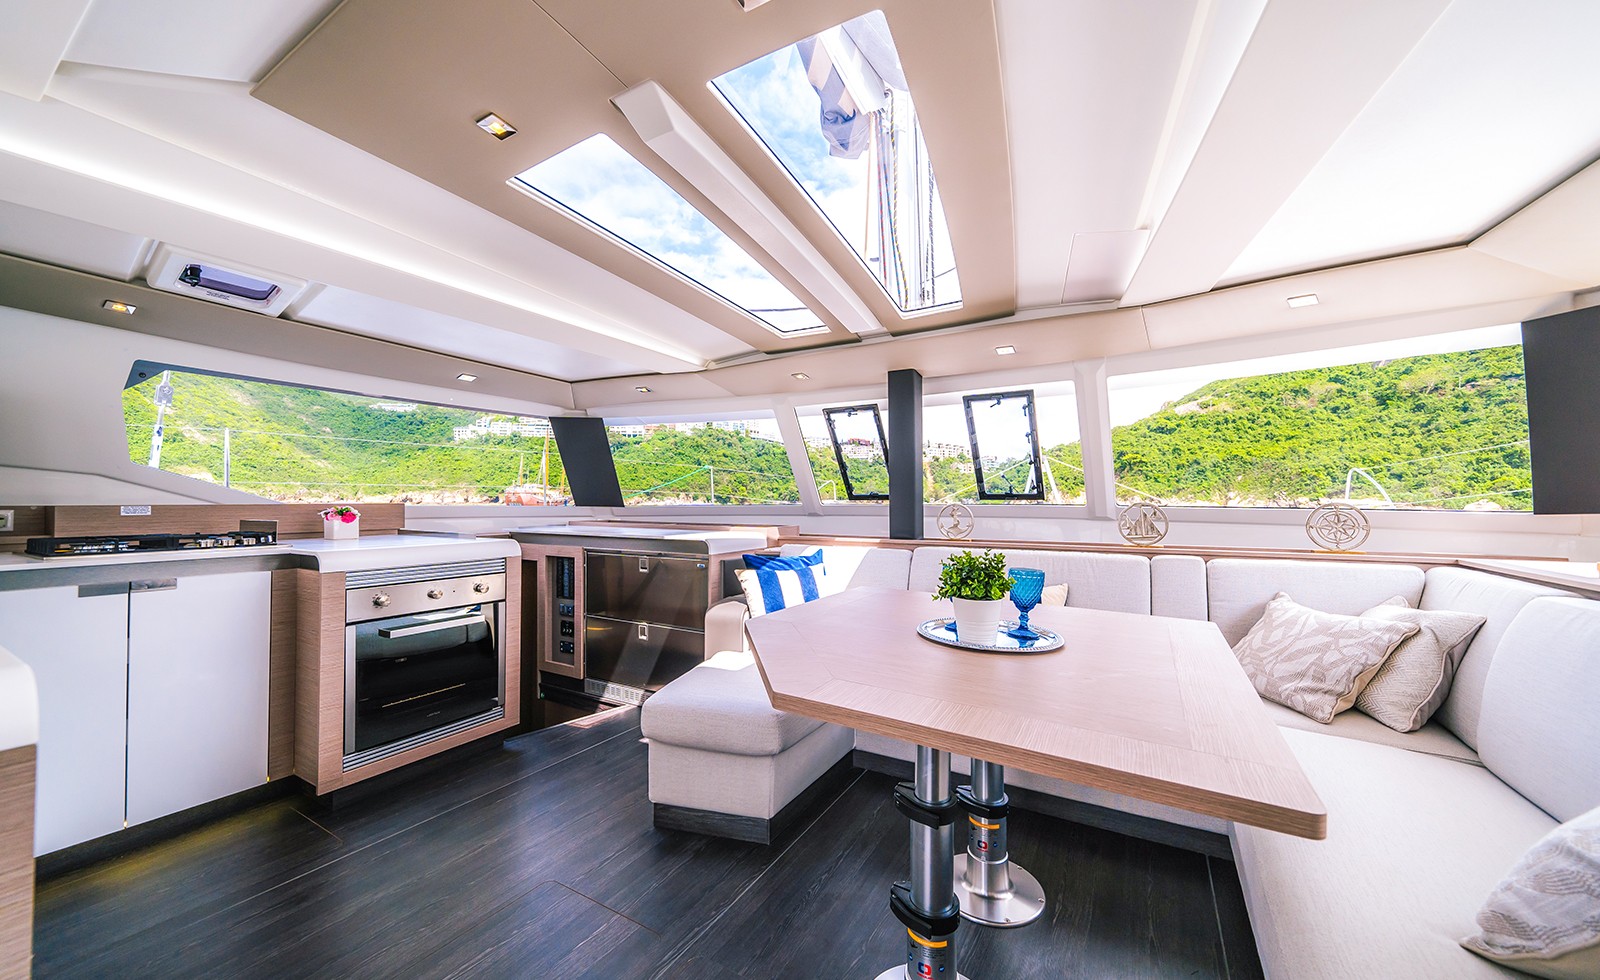 Unveiling the Tanna 47: Fountaine Pajot's Swiss Army Knife of Boating Excellence